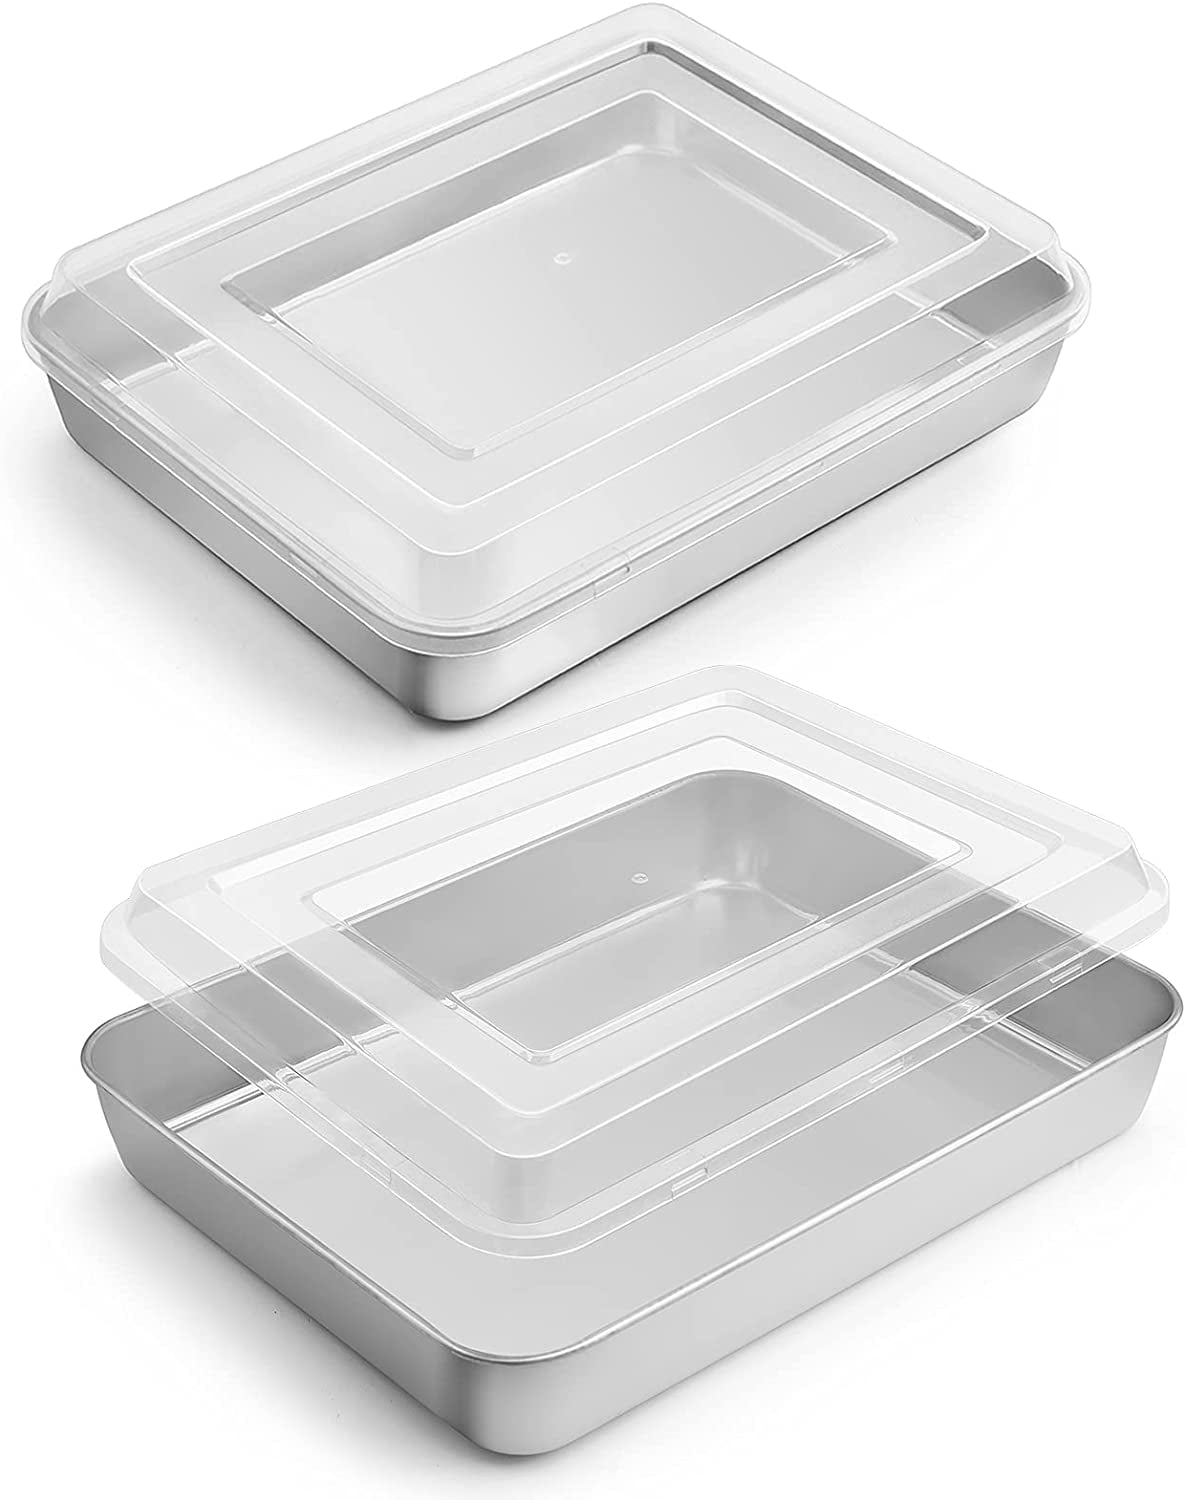 Herogo Baking Pan with Lid, 9 x 12 Inch Stainless Steel Lasagna Pan Deep,  Rectangle Cake Pan with Lid for Brownies Casseroles Cakes, 2 Pans+2 Lids